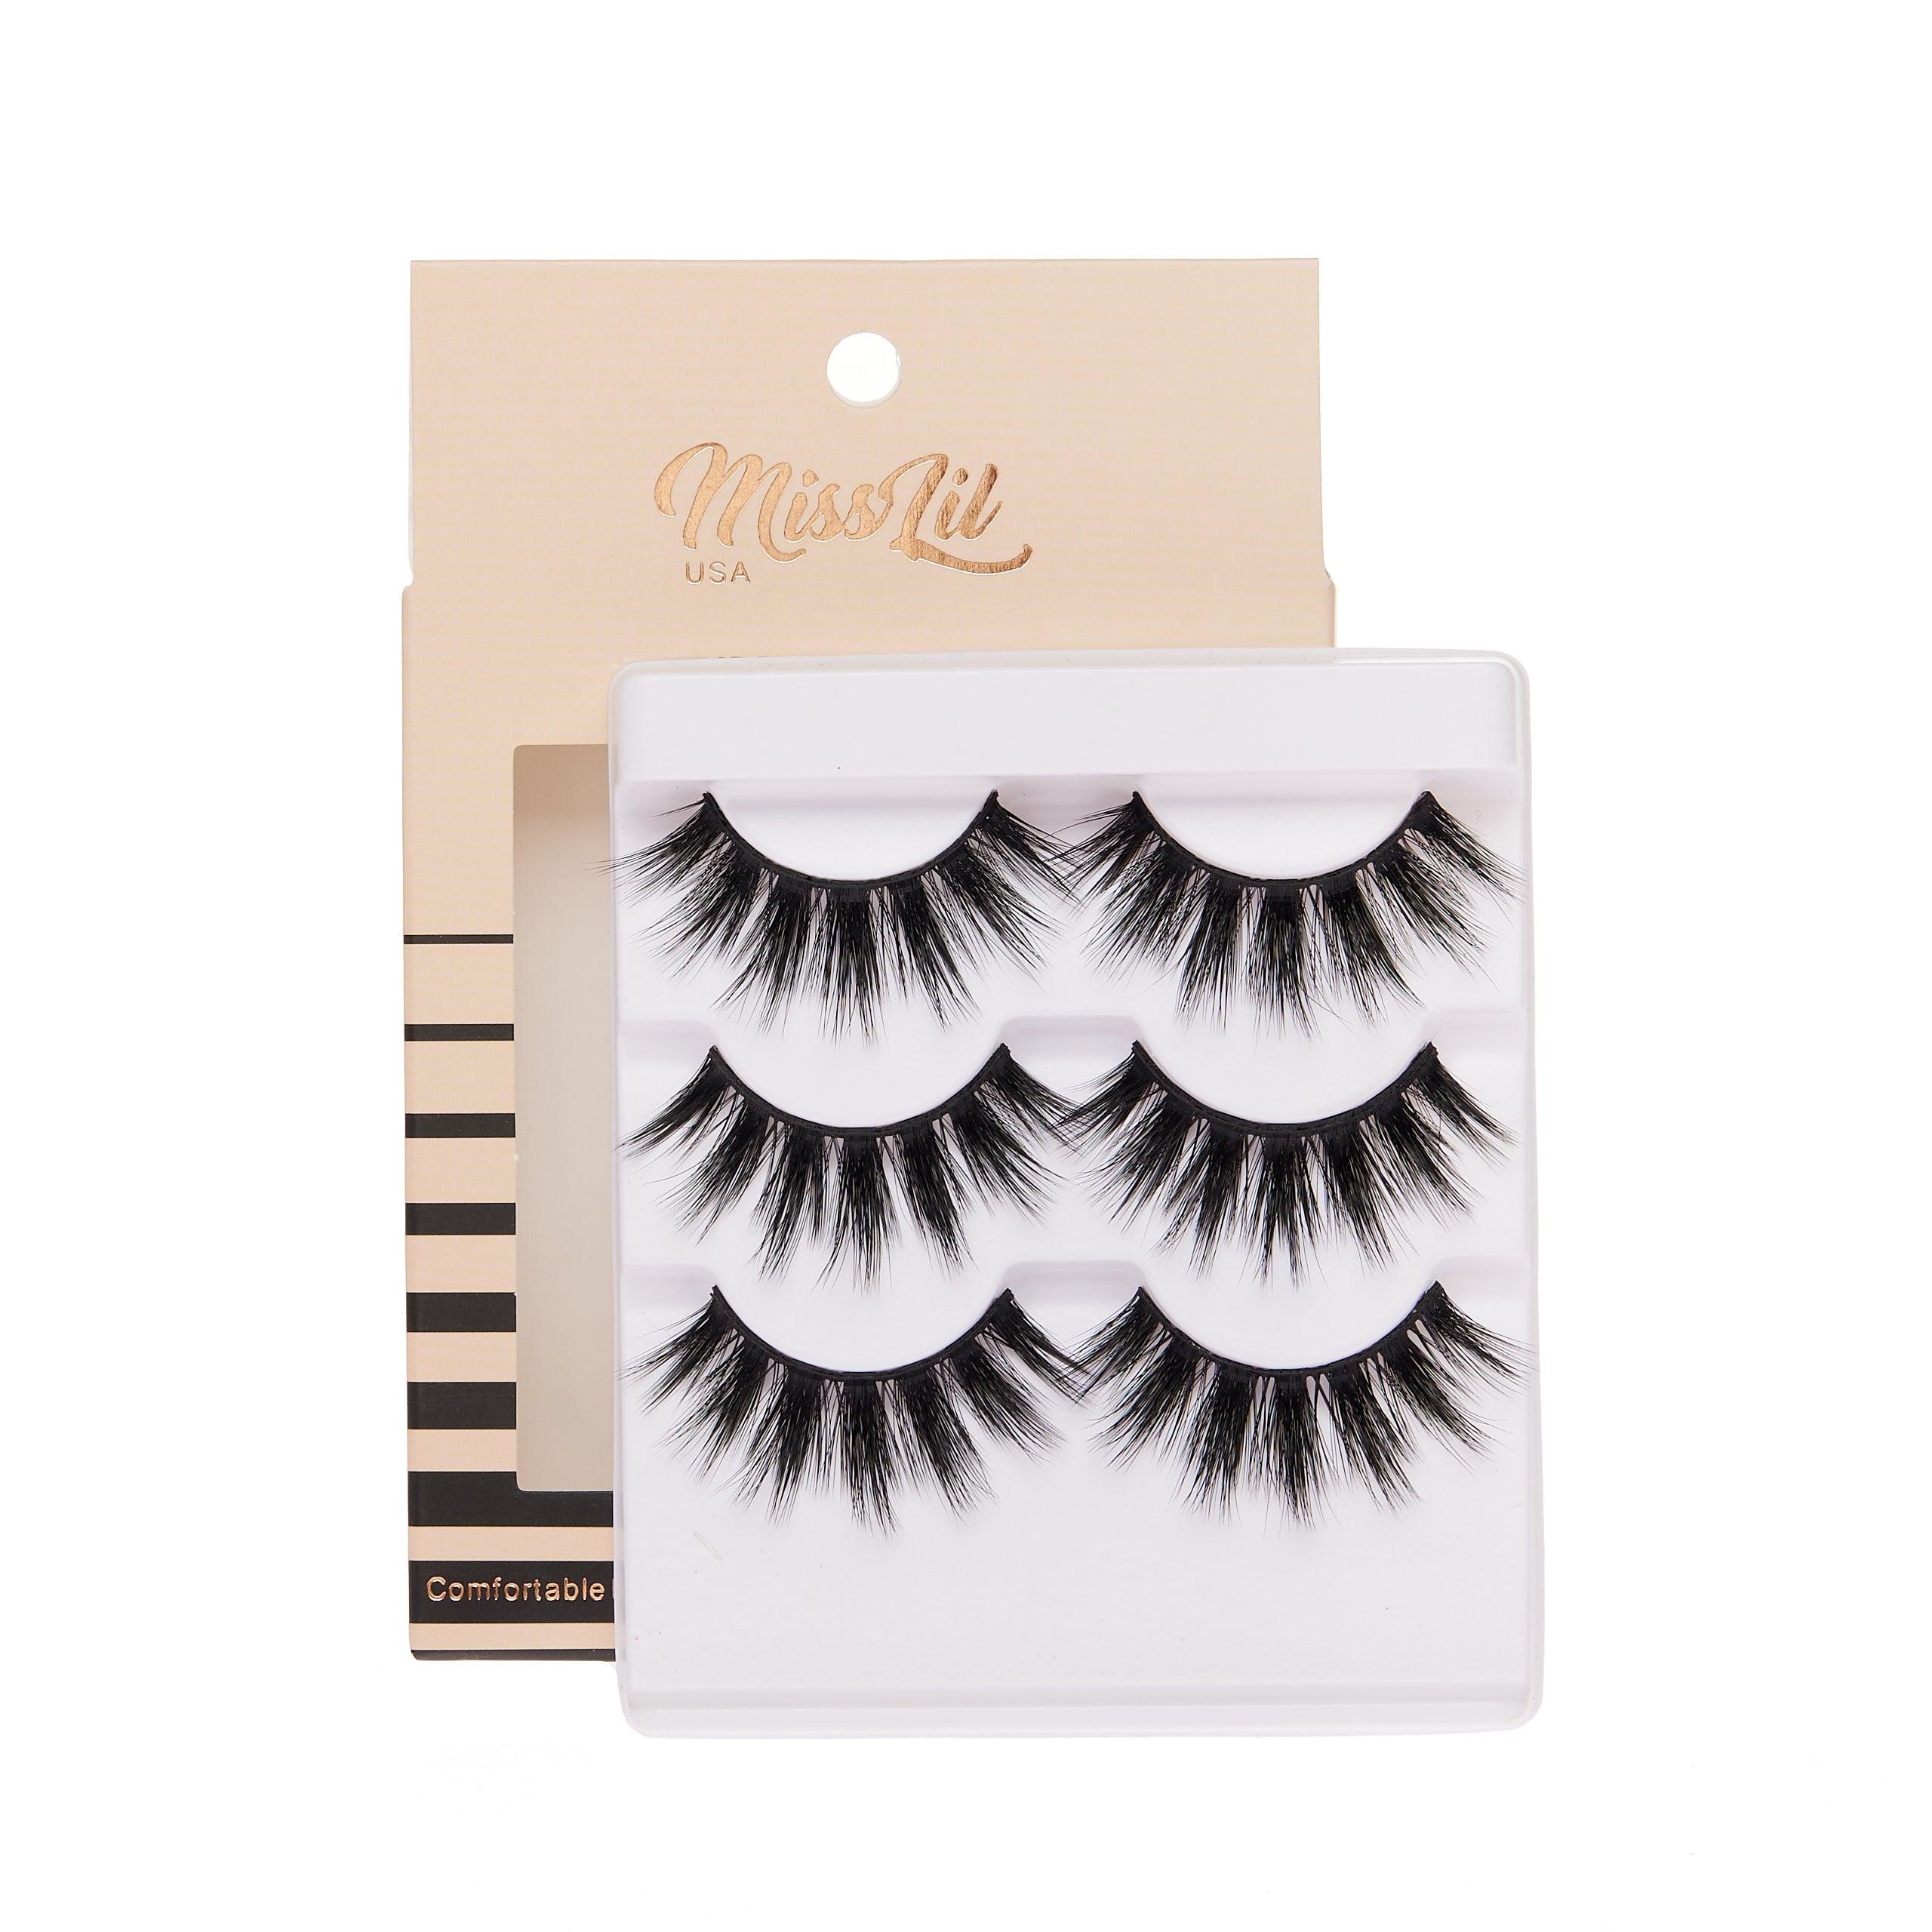 3-Pair Faux 9D Mink Eyelashes - Luxury Collection #9 - Pack of 12 - Miss Lil USA